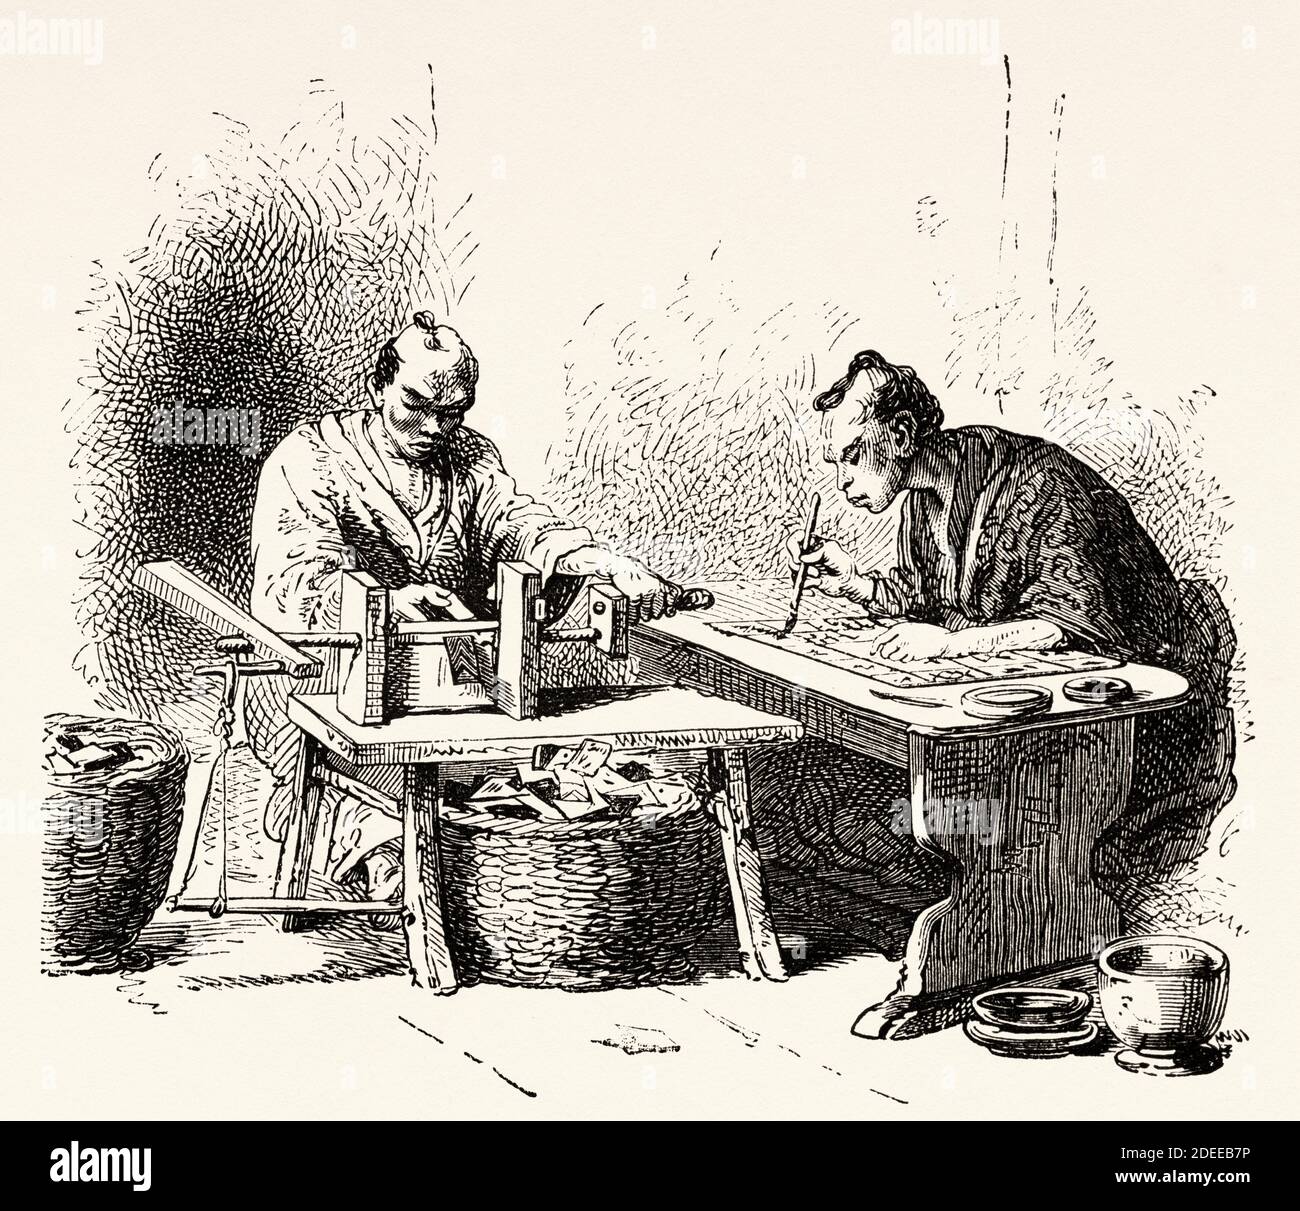 Japanese Crafts. Business card makers, Japan. Old 19th century engraved illustration Travel to Japan by Aime Humbert  from El Mundo en La Mano 1879 Stock Photo